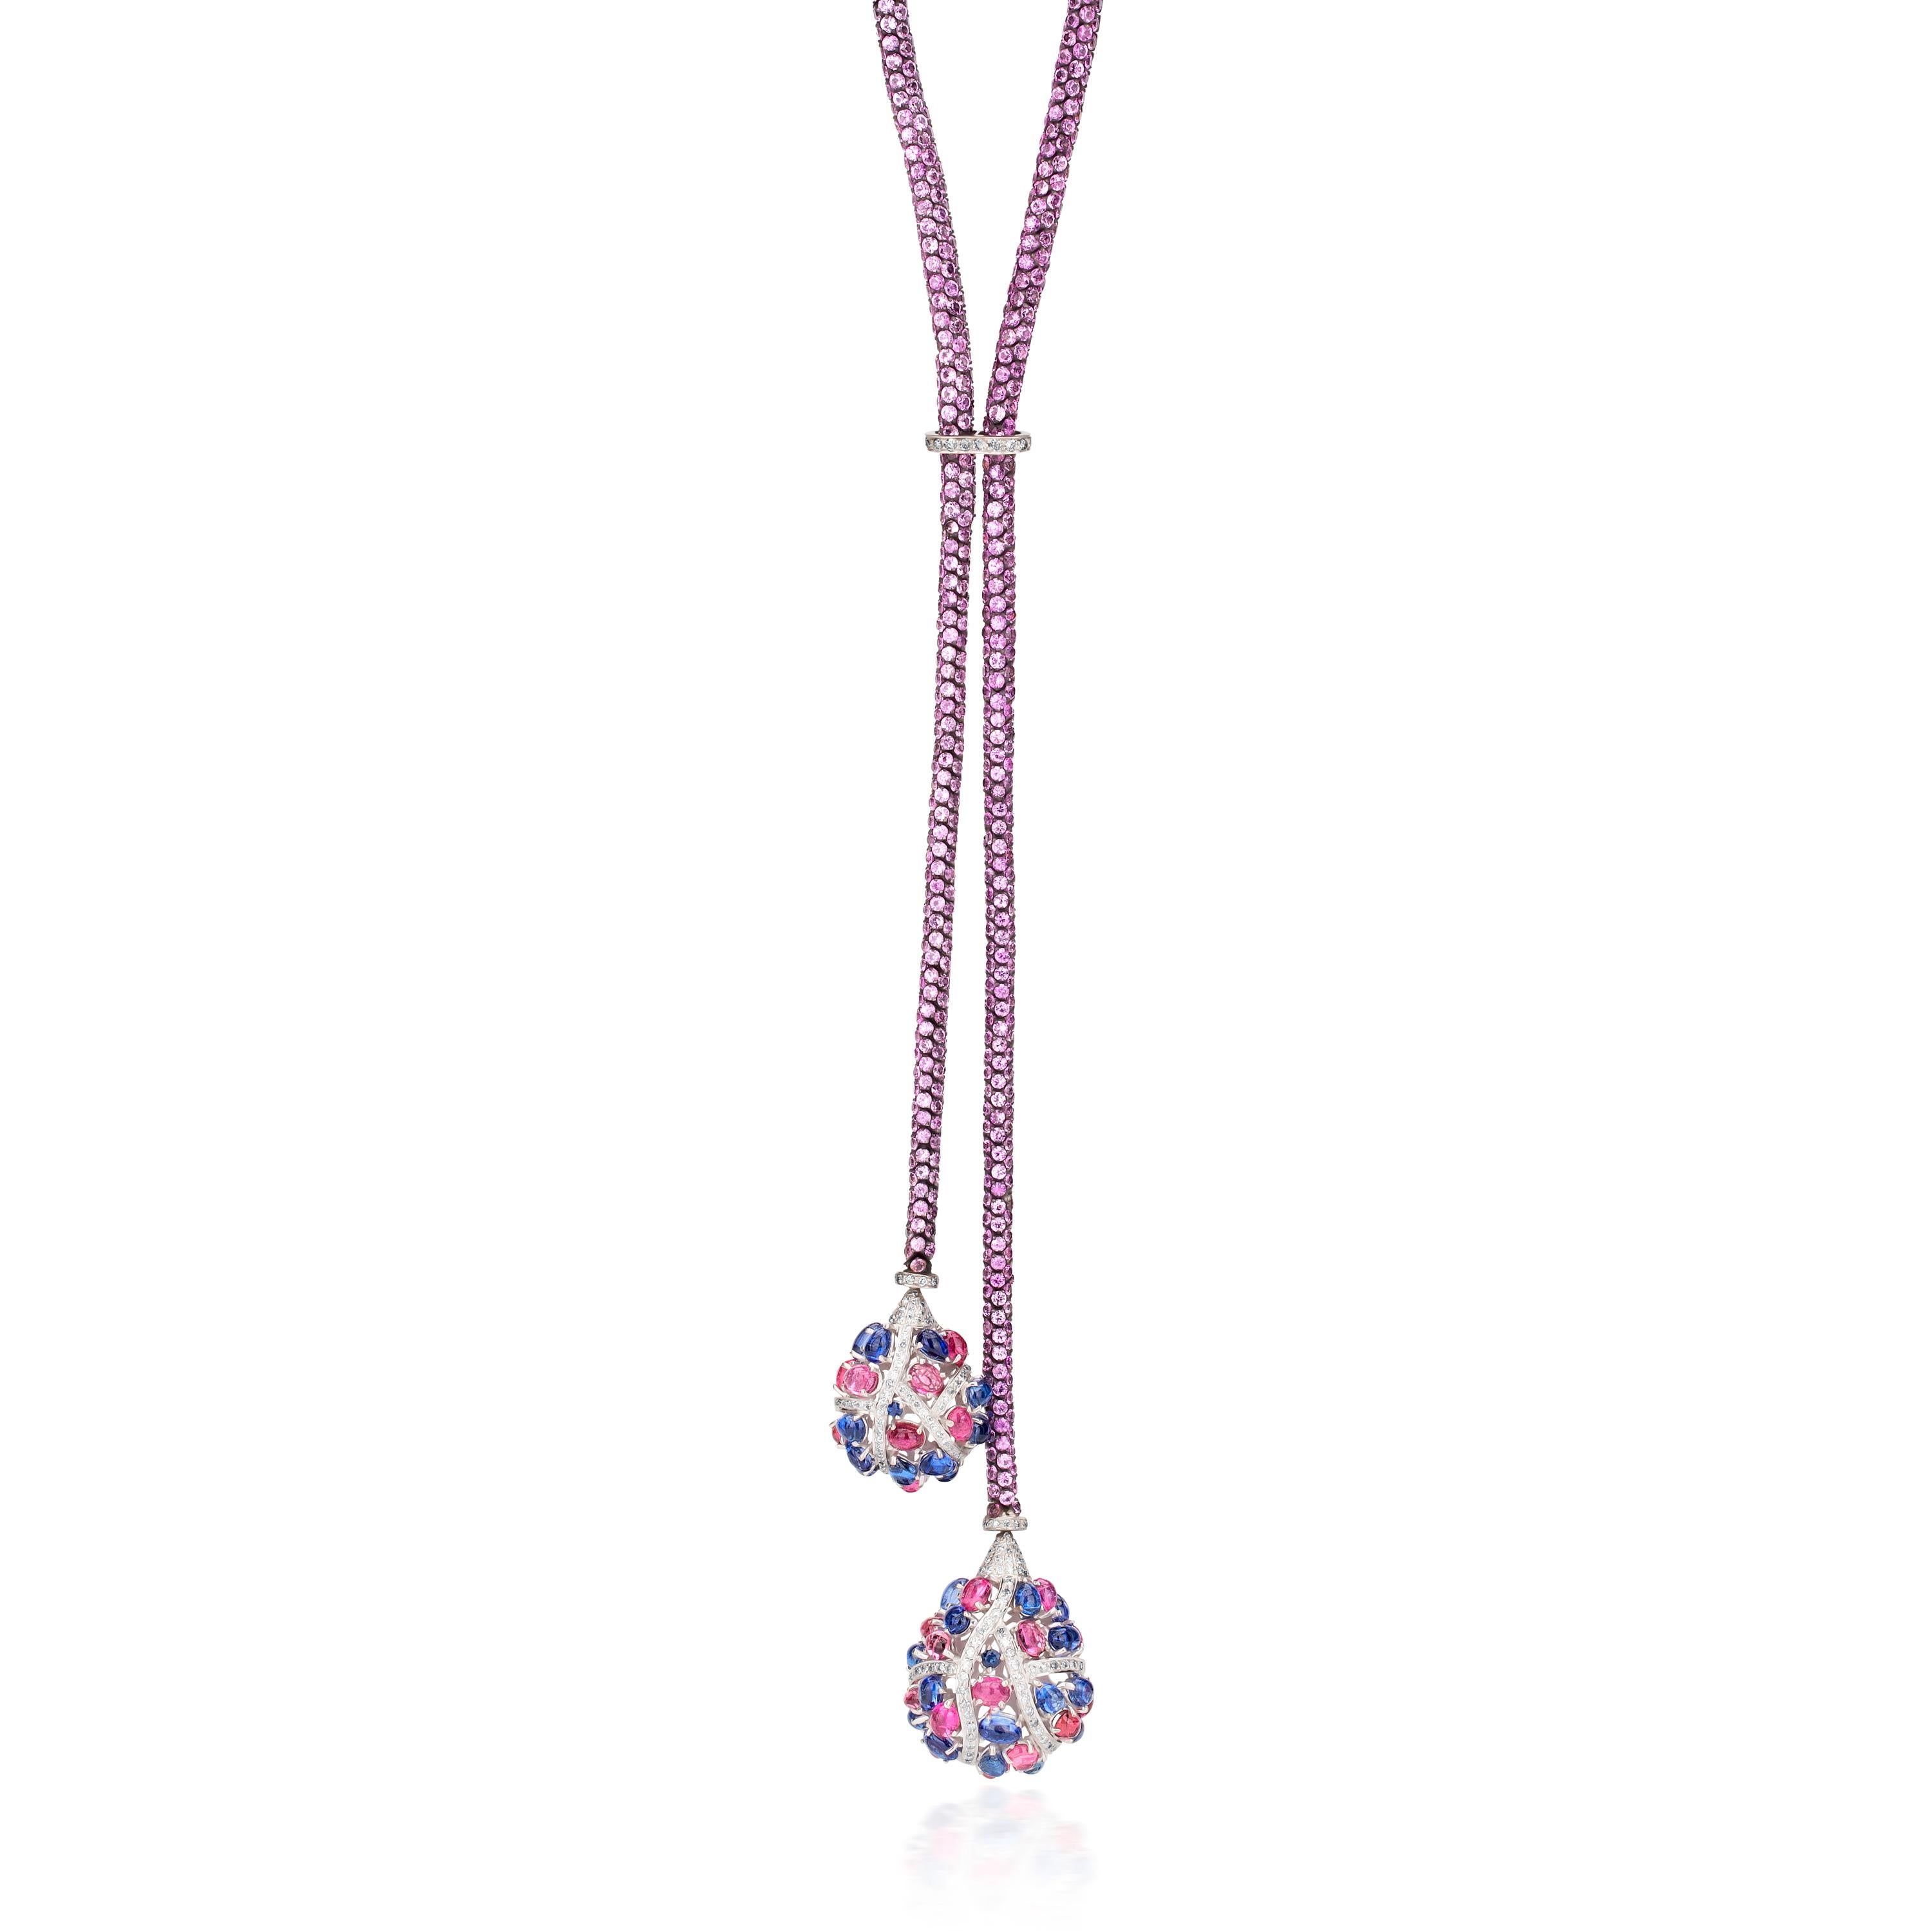 This beautiful Victorian style lariat necklace, crafted in 18K gold and 925 sterling silver, has a pair of blue oval kyanite and pink oval tourmaline laden drops. These oval stones are brought together with shimmering diamond bands. The drops swing